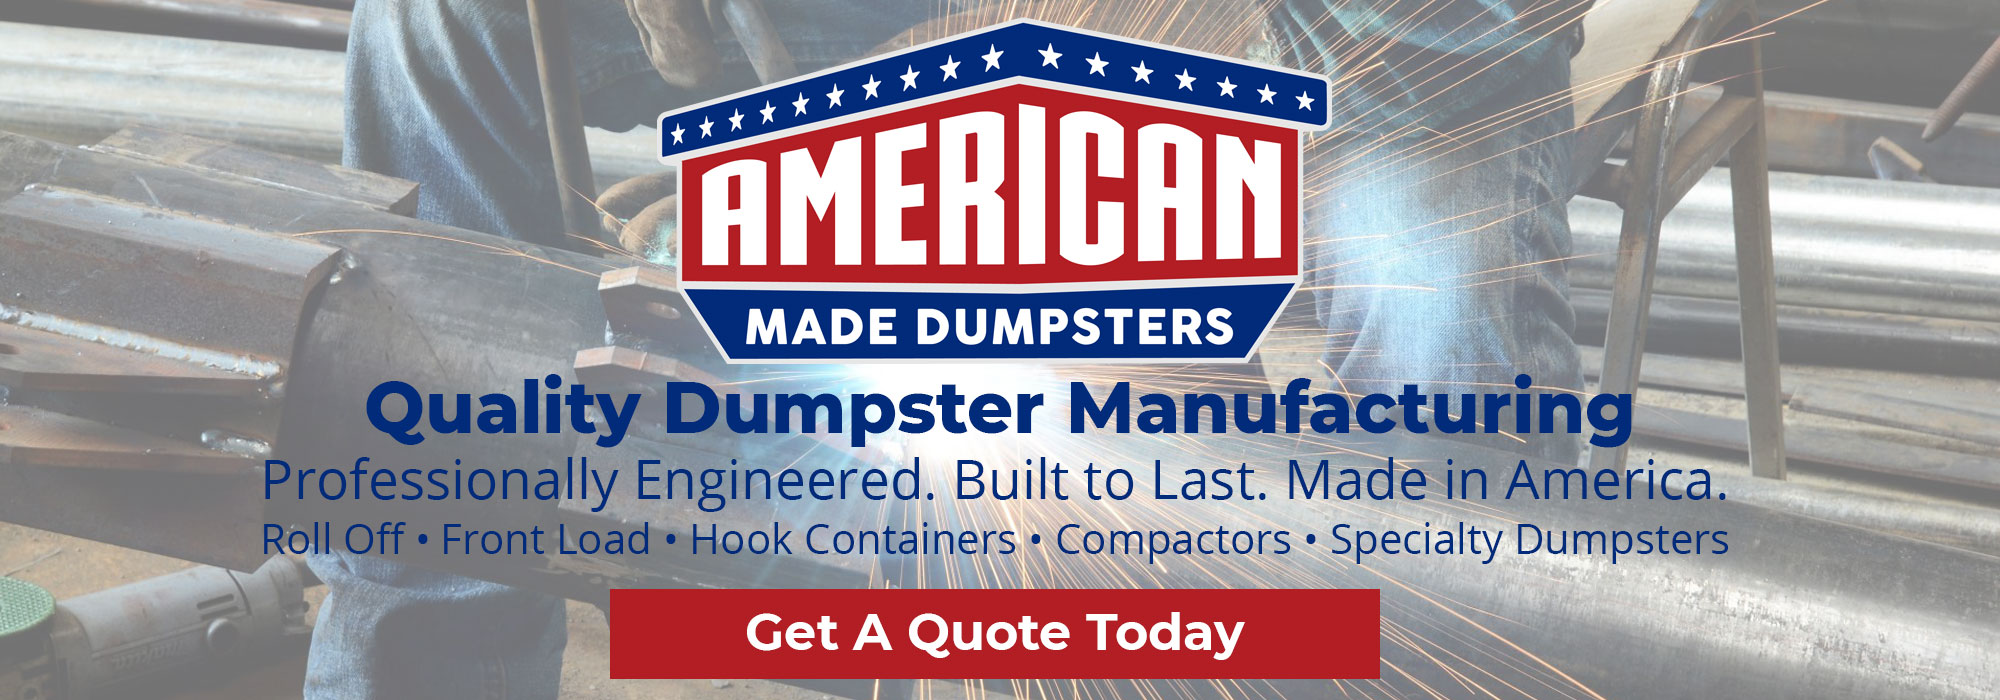 American Made Dumpsters Banner Ad